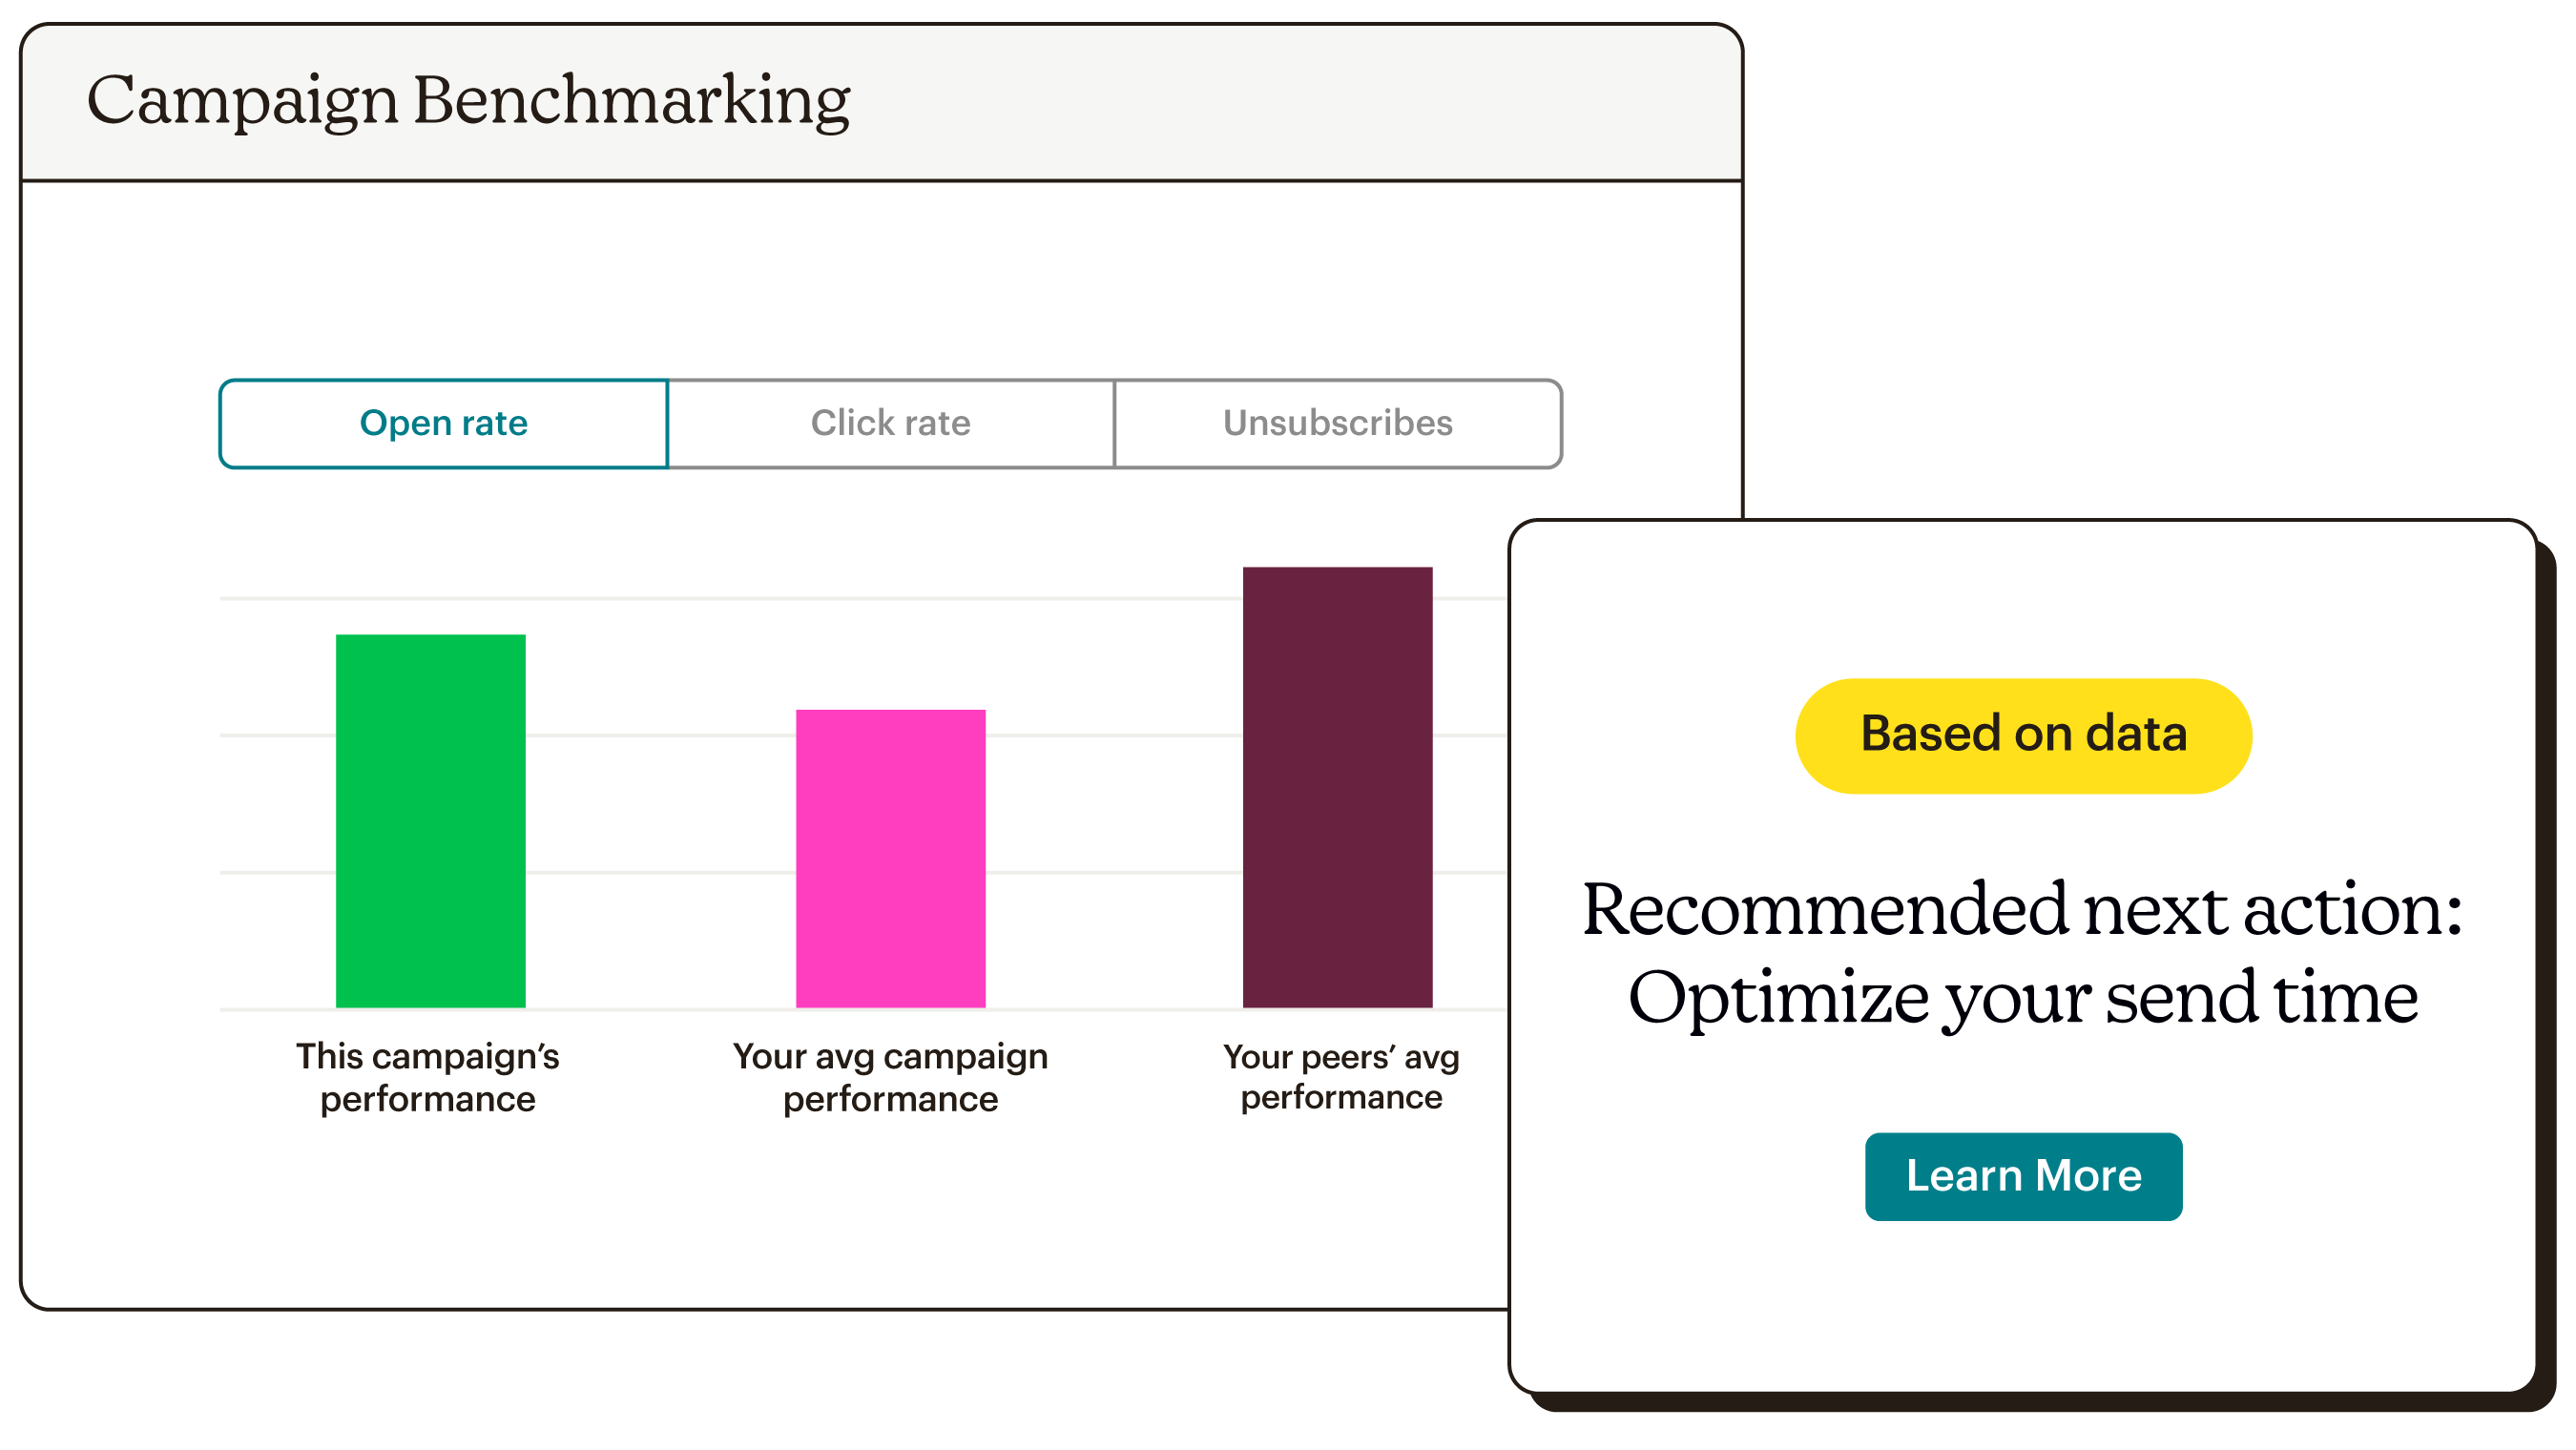 Campaign benchmarking graph with smart recommendation about optimizing send time.